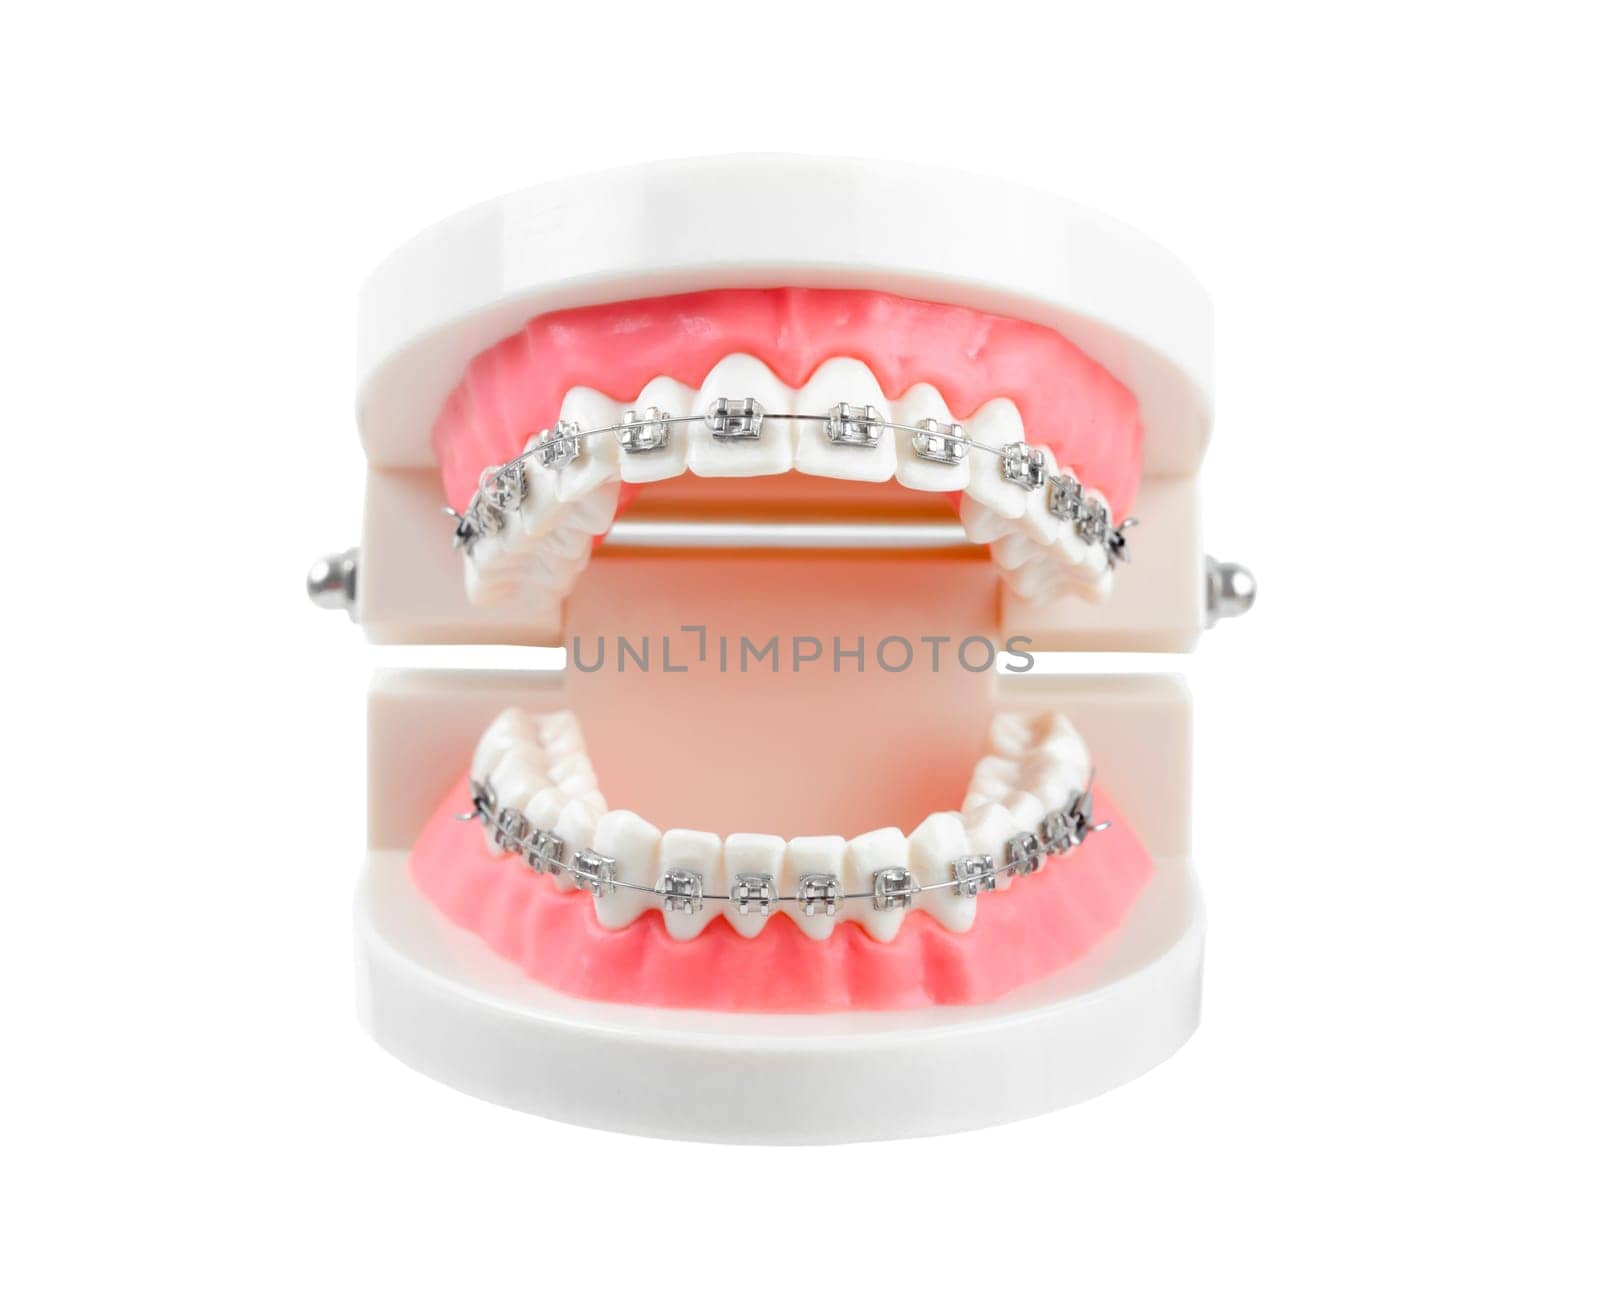 The Teeth model with metal wire dental braces or dental instruments isolated on white background, Save clipping path. by Gamjai